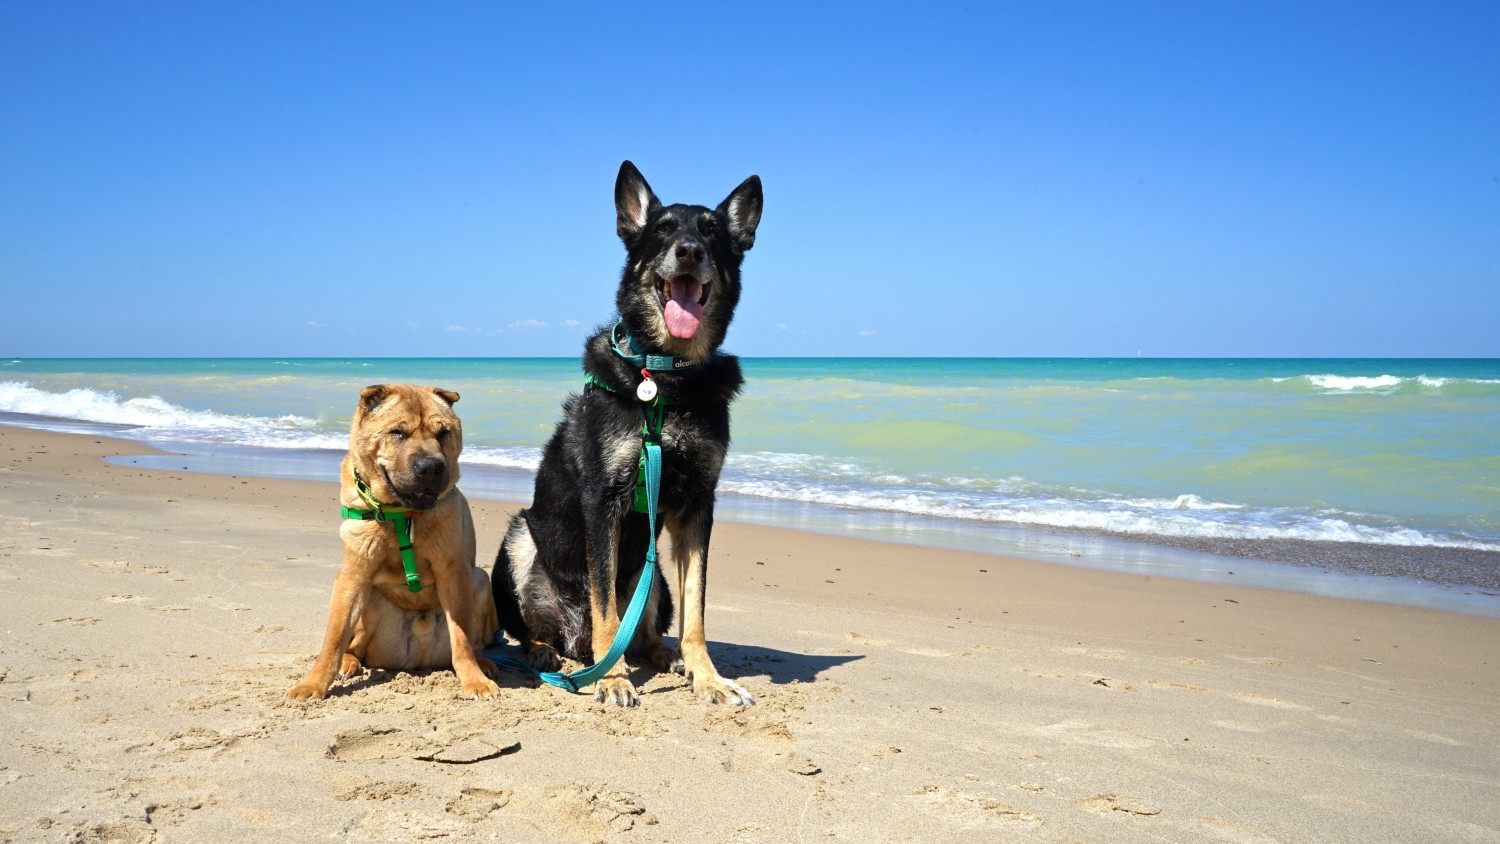 Shar-pei and German Shepherd Dog on a pet friendly beach at Indiana Dunes National Park, Indiana